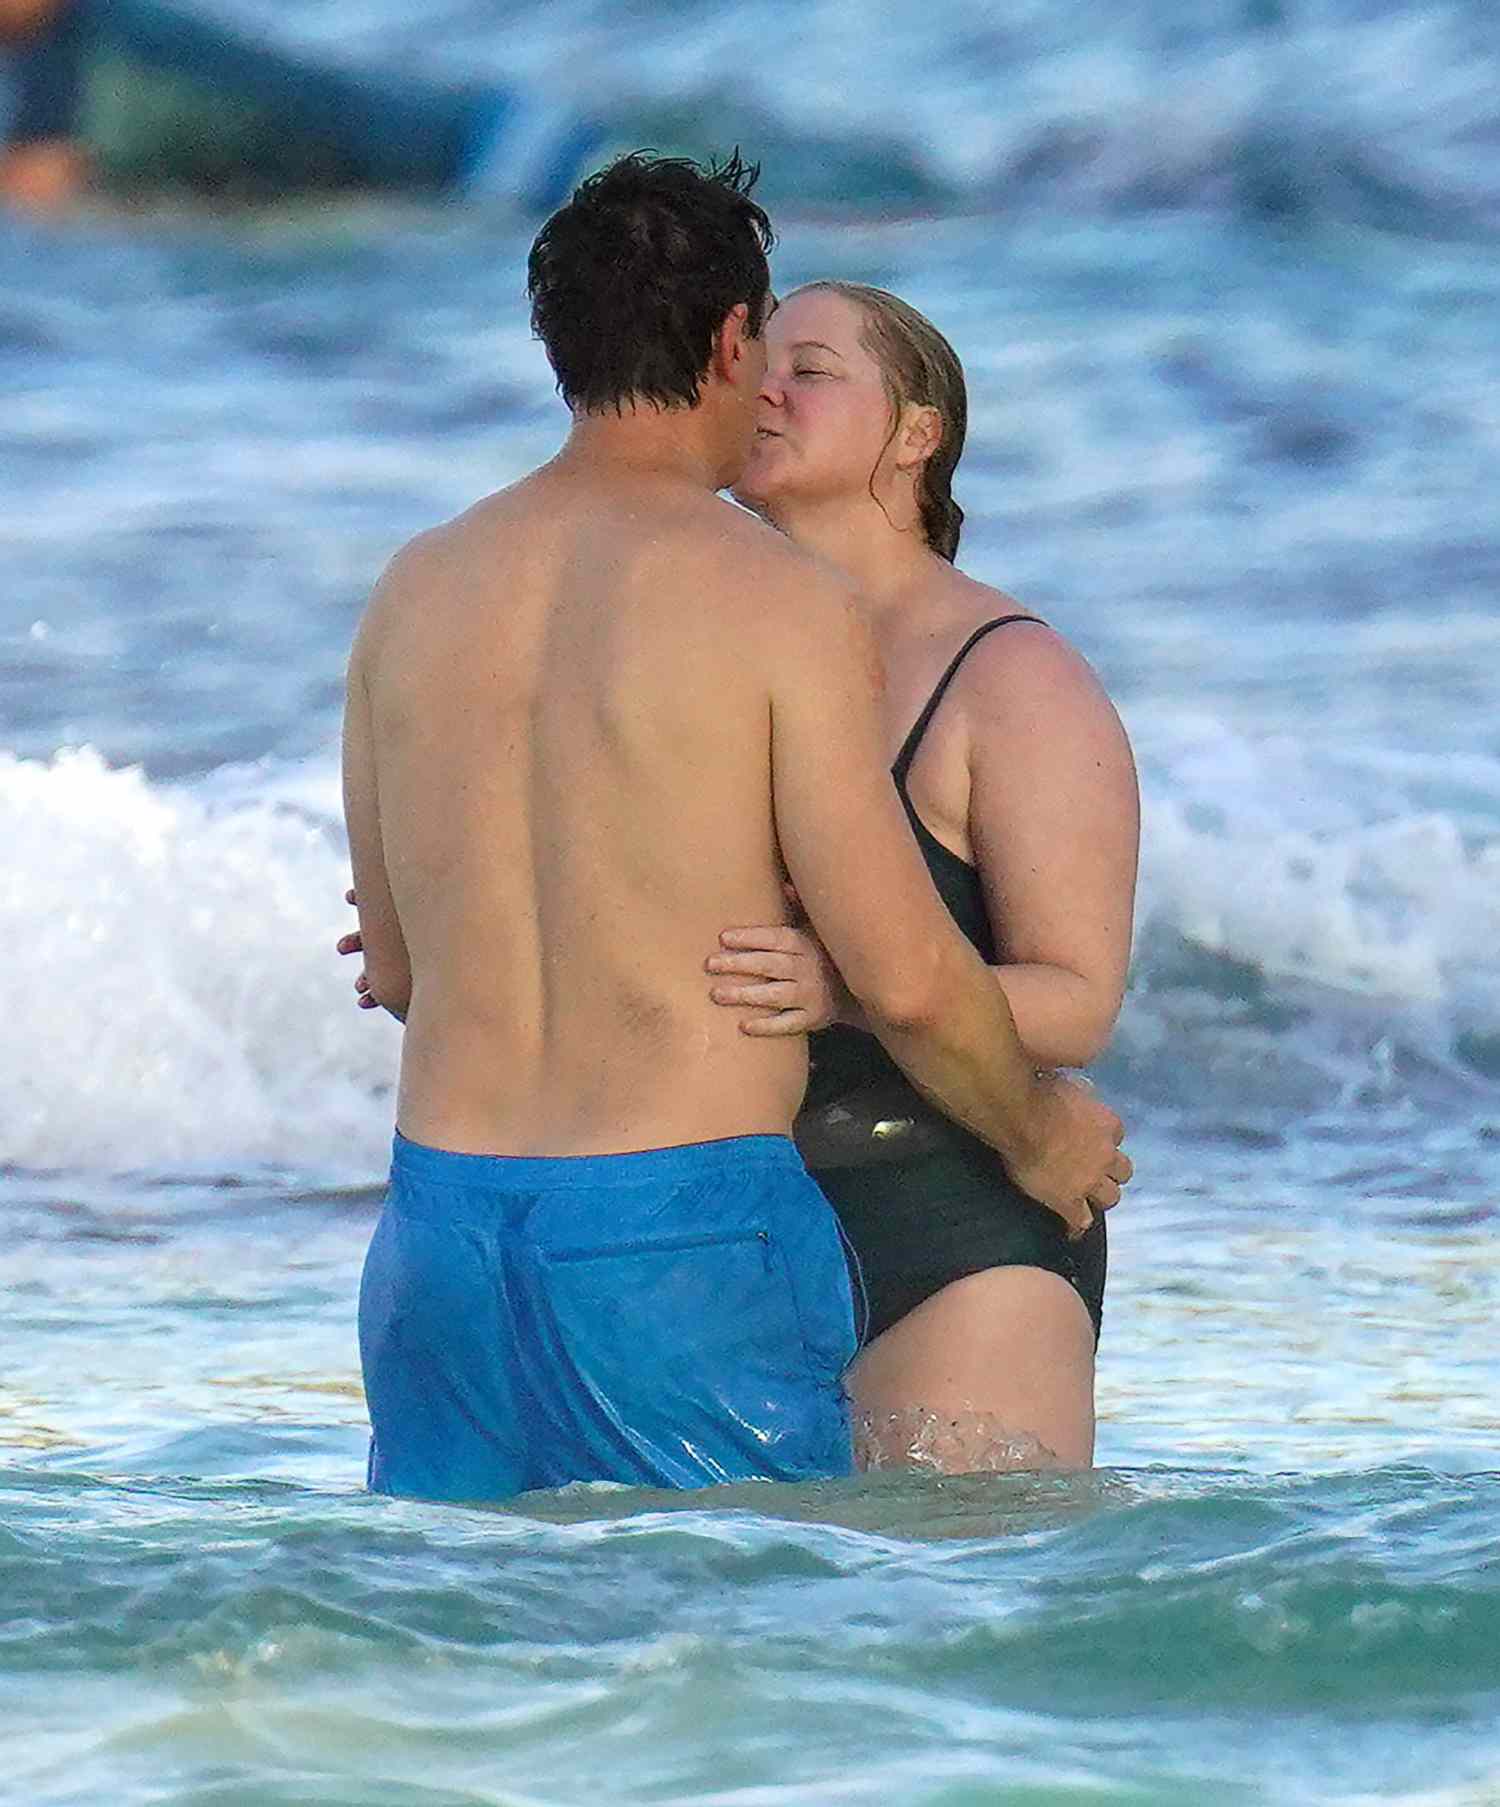 PREMIUM EXCLUSIVE: *NO WEB UNTIL 215PM EST 20TH DEC* Amy Schumer is all smiles as she and husband Chris Fischer enjoy a dip in the Caribbean sea during the holiday season in St Barts